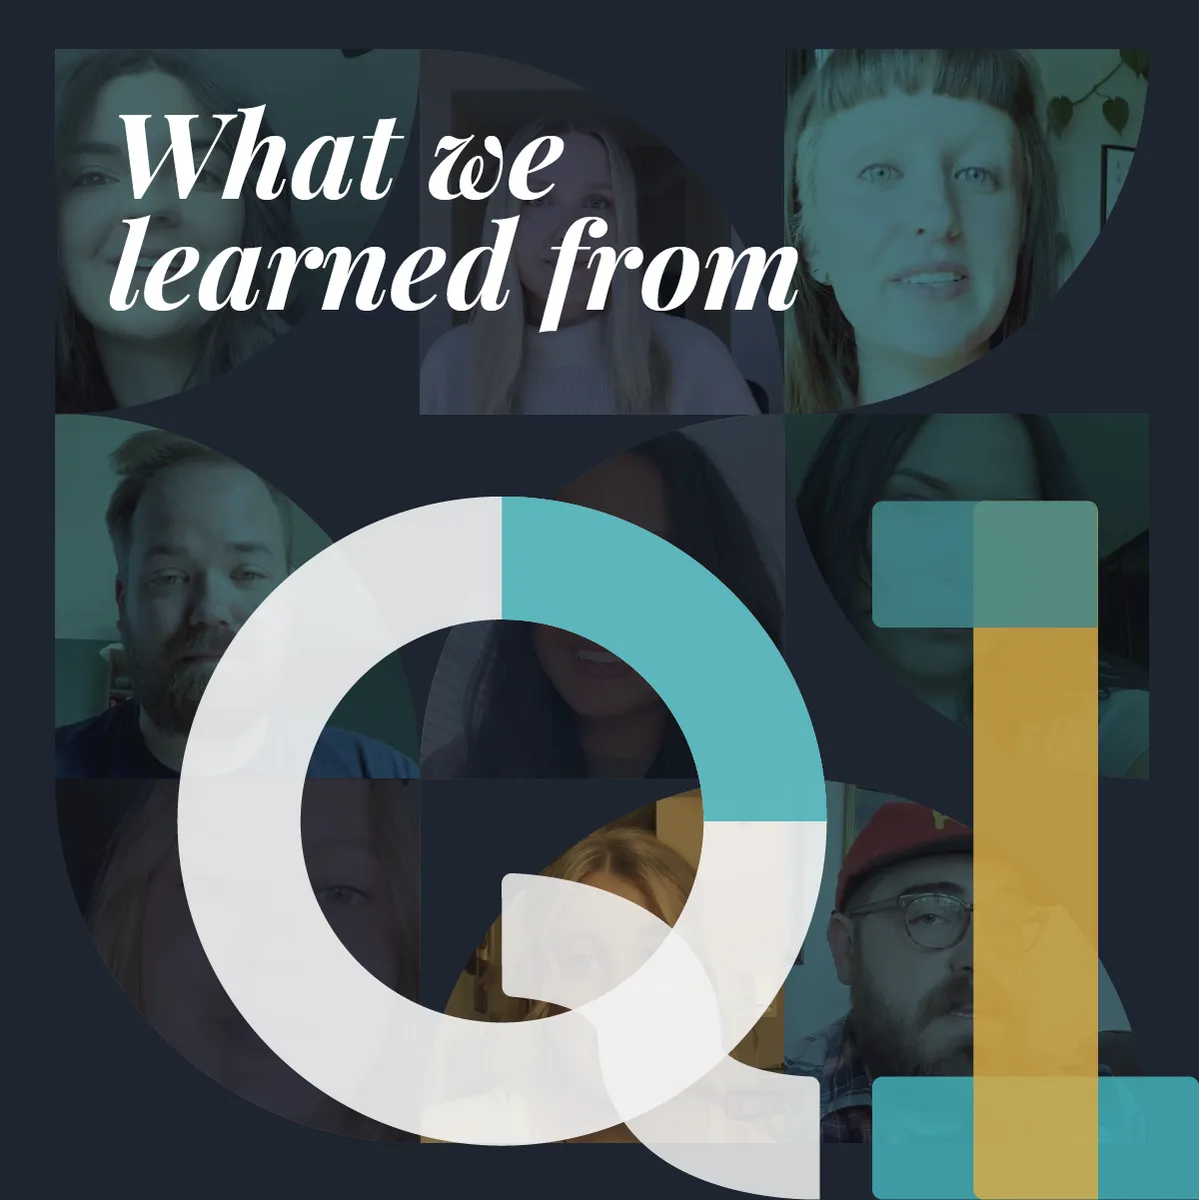 Group photo with text overlay that says "What We Learned From Q1"